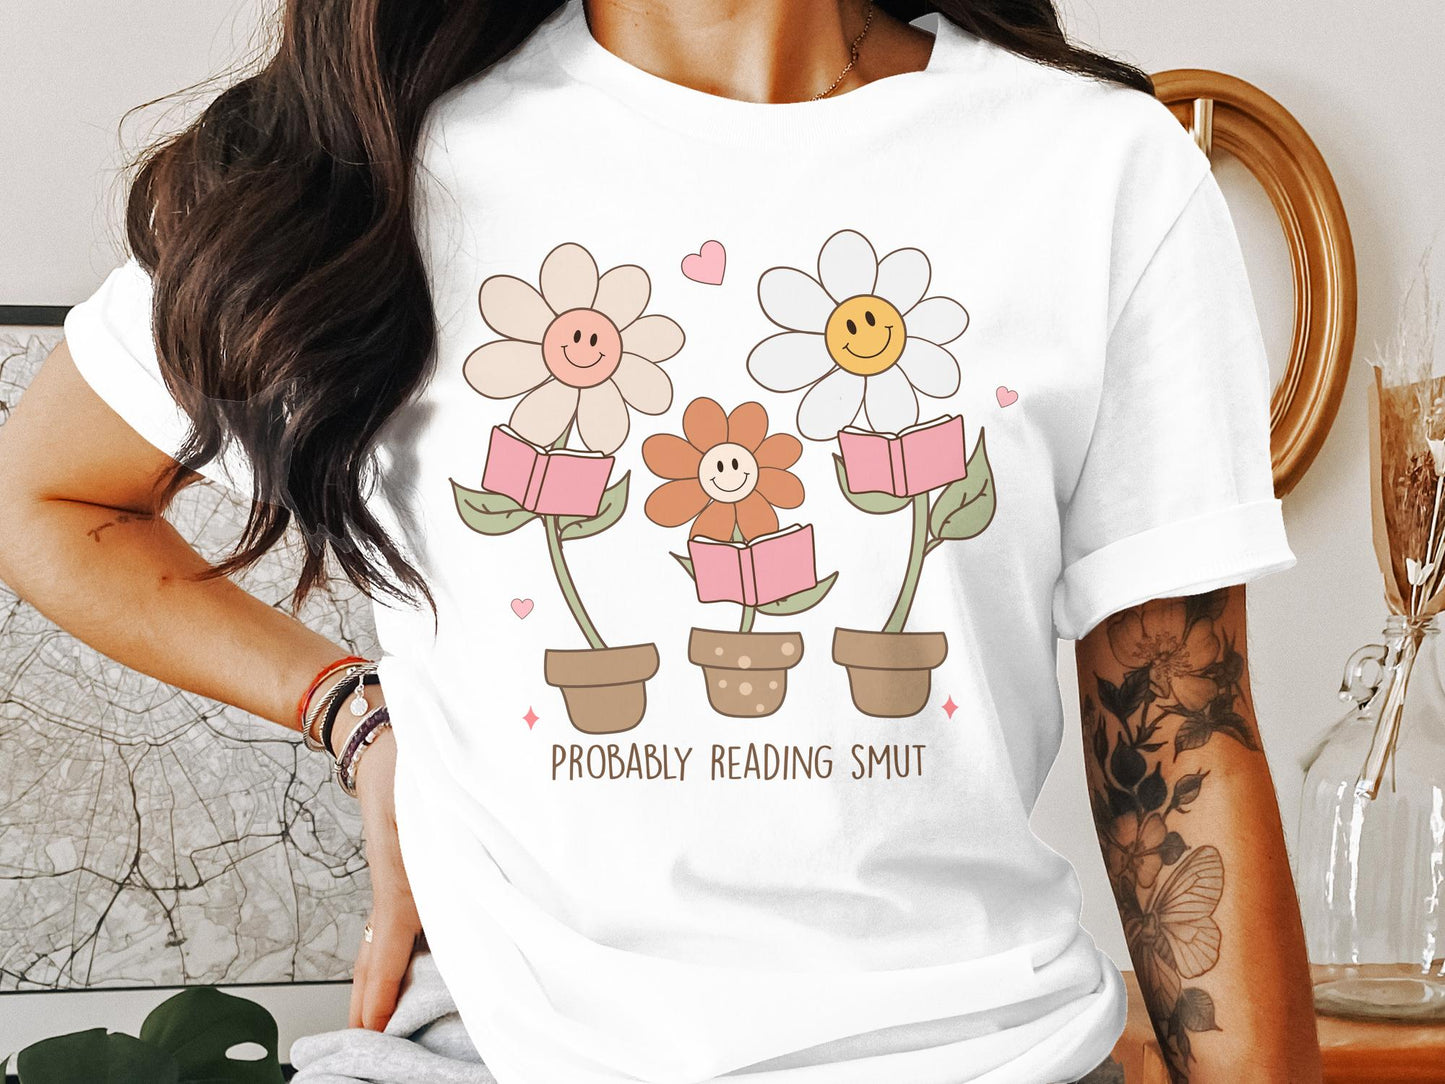 Whimsical Flower Pots Reading Smut Novel T-Shirt, Cute Book Lover Tee, Quirky Plant Illustration, Fun Casual Women's Clothing